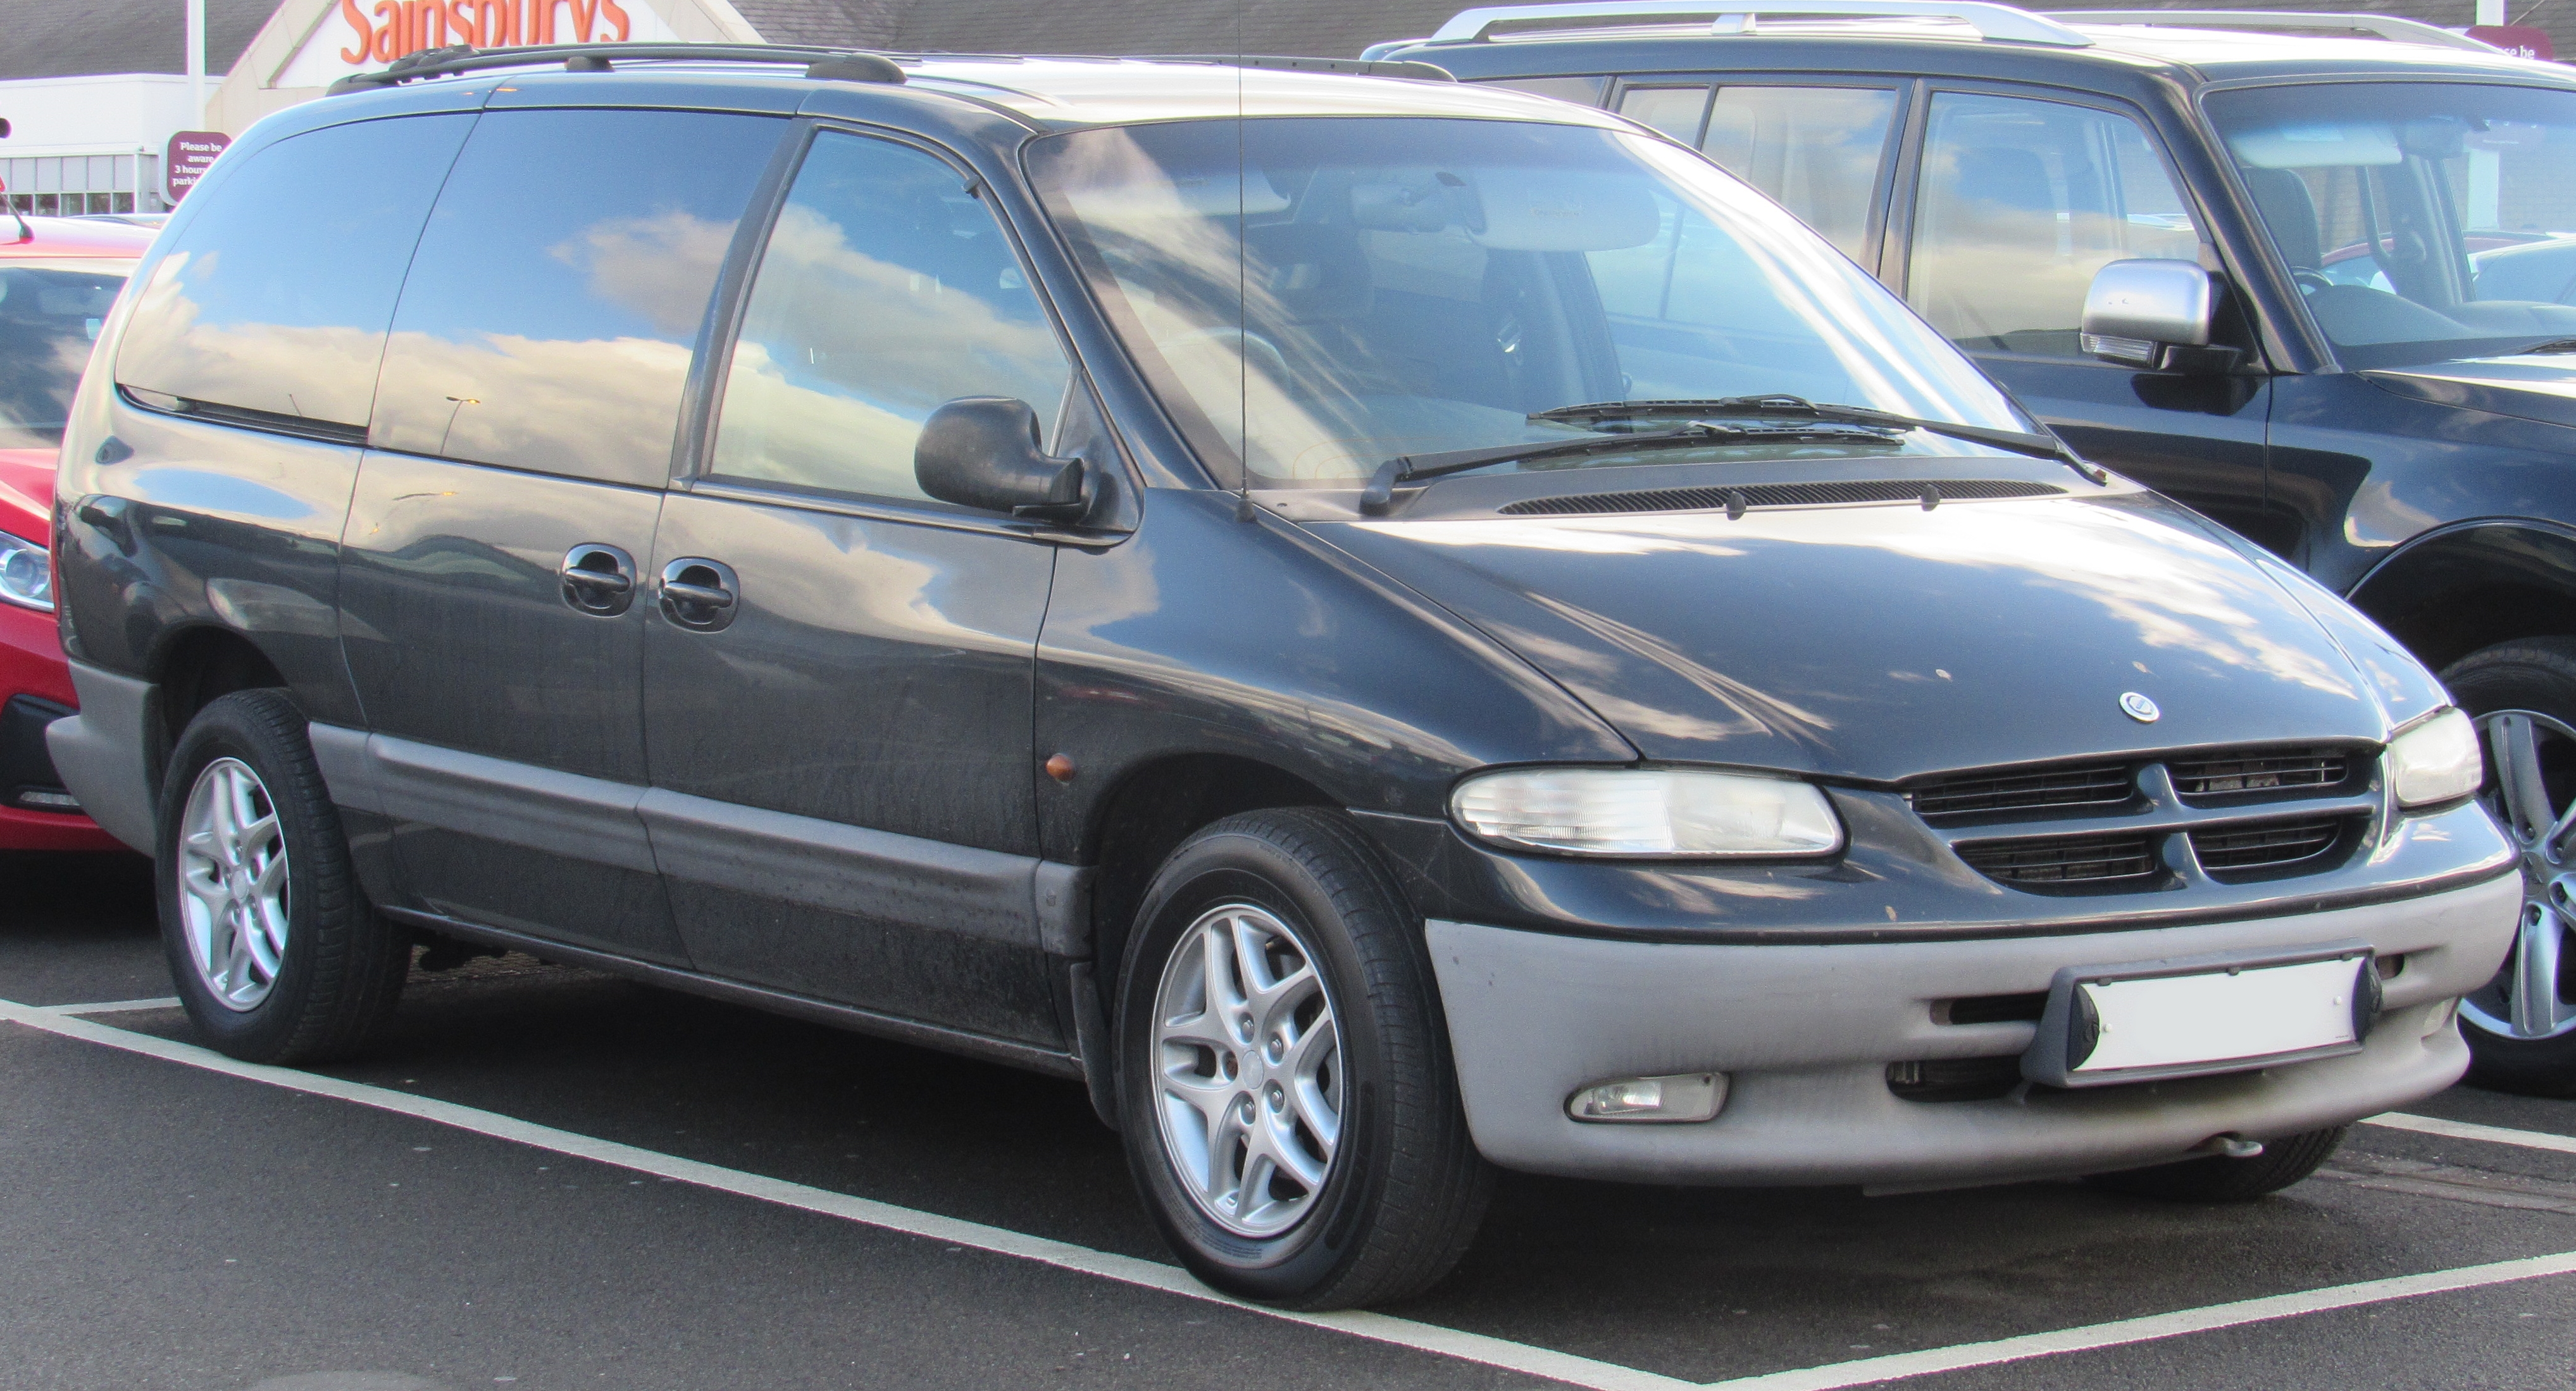 File:2001 Chrysler Grand Voyager LE Automatic 3.3.jpg - Wikimedia Commons